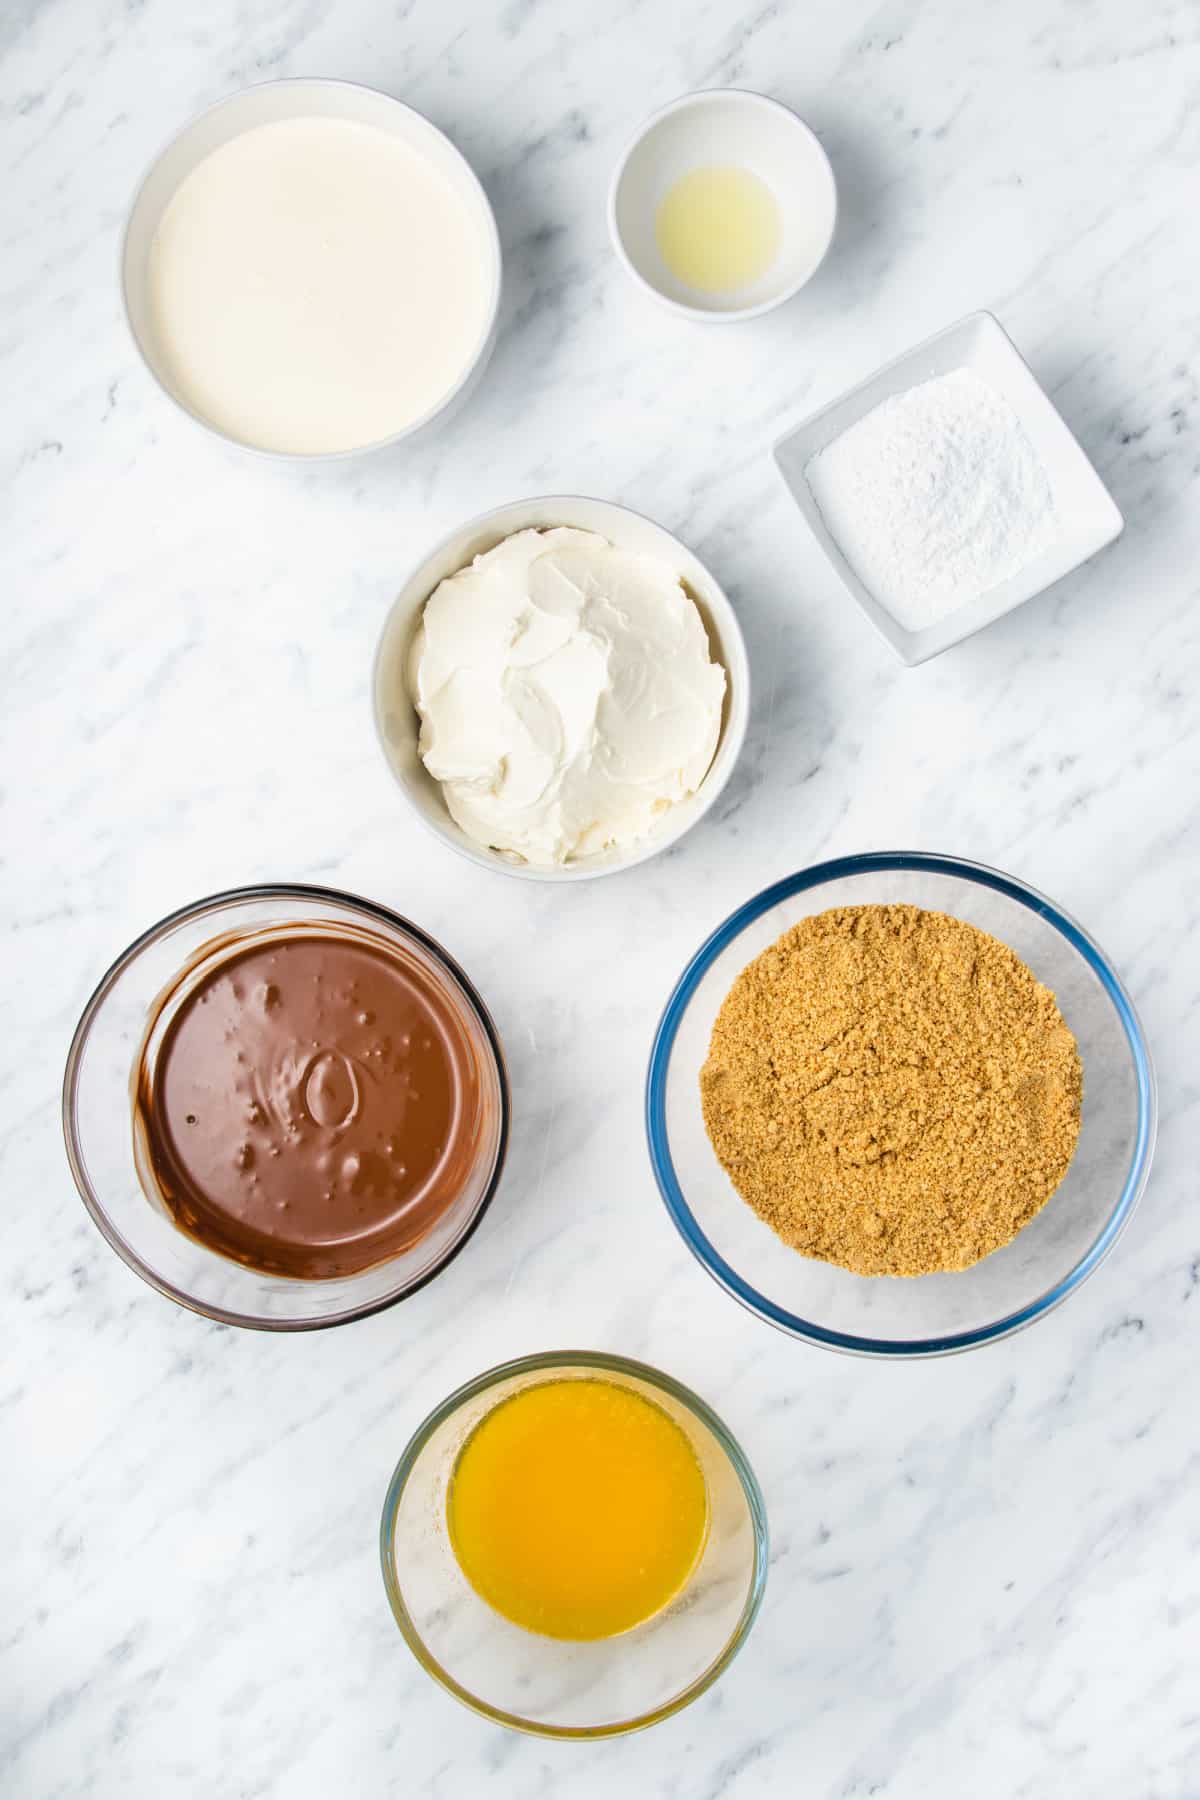 Ingredients for No-Bake Chocolate Cheesecake